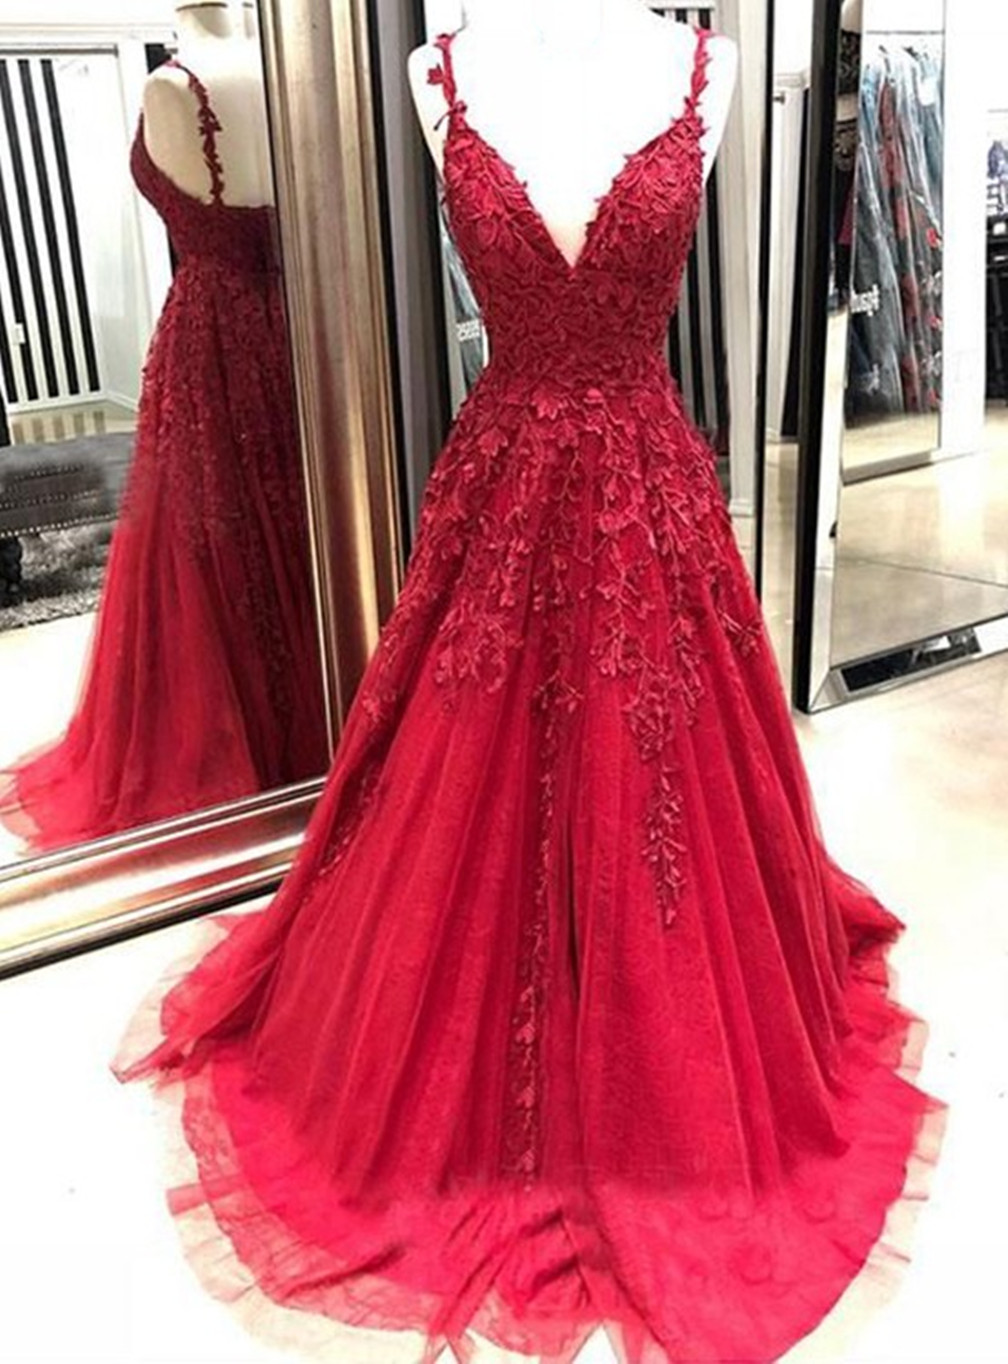 Women A-line/princess Tulle Applique Prom Dresses Long Spaghetti Straps Evening Party Gowns Sleeveless Formal Dress Yp036